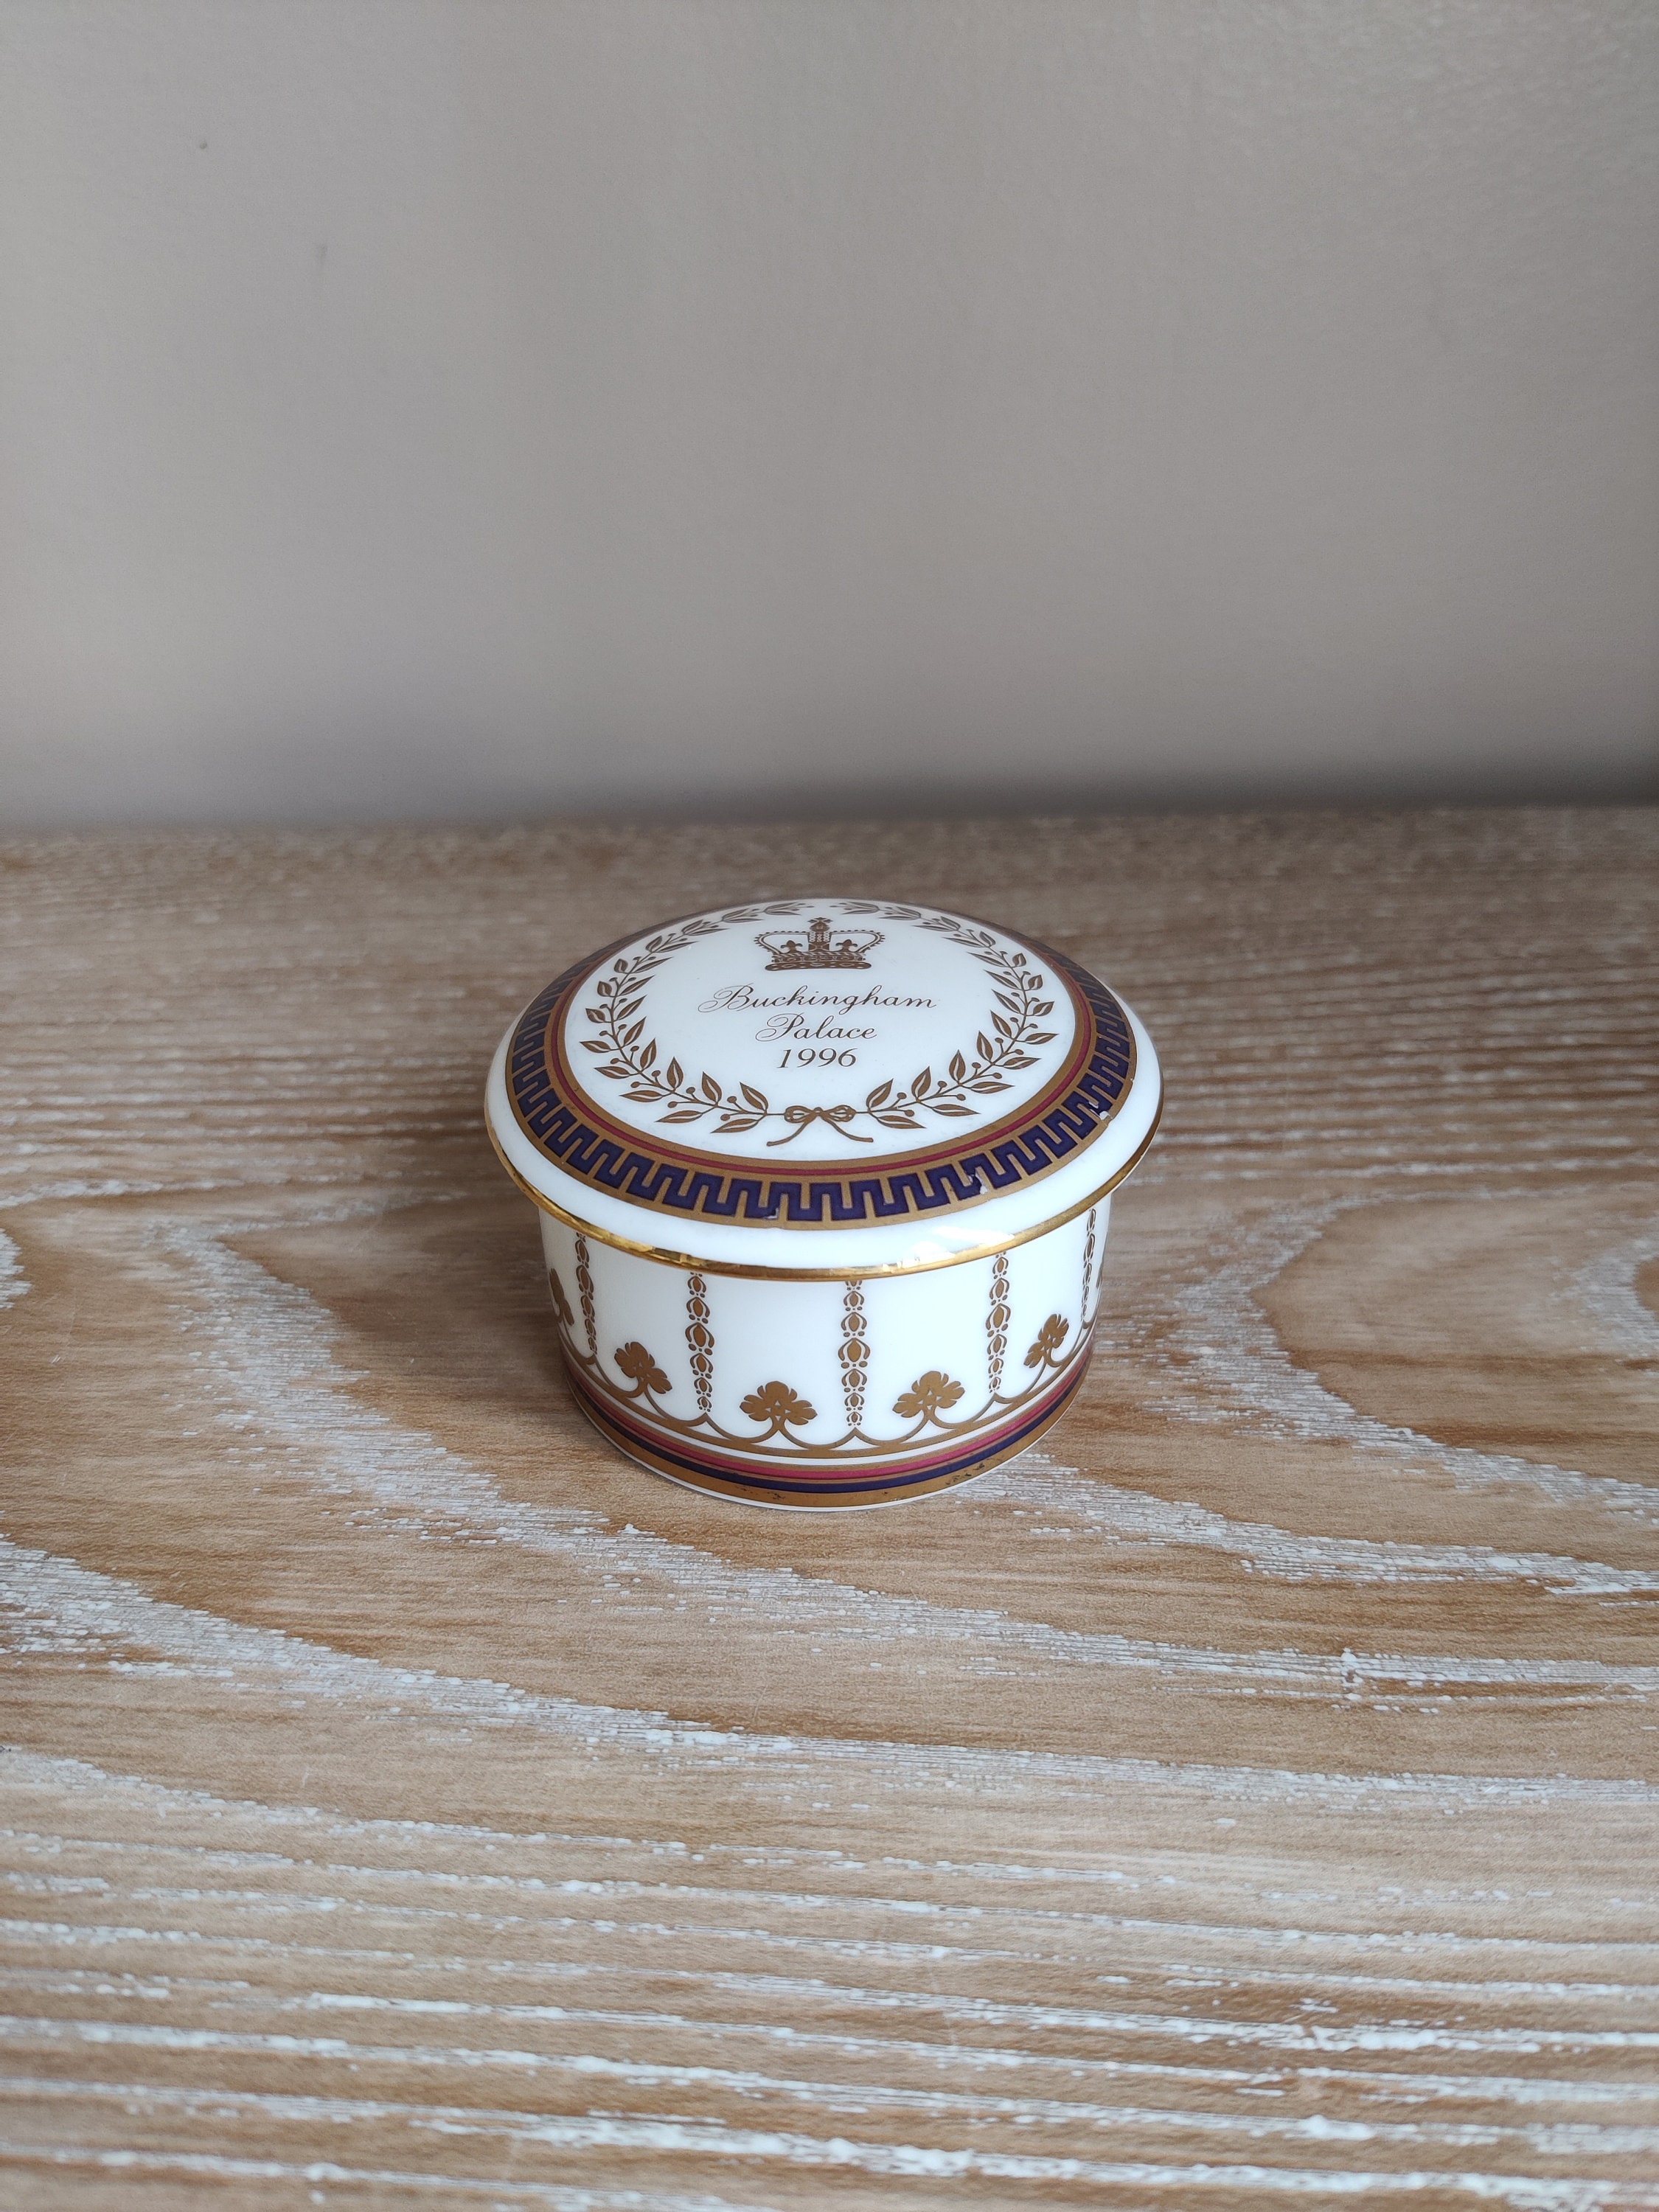 BUCKINGHAM PALACE TRINKET POTS SELECTION. THE ROYAL COLLECTION PILL BOXES 